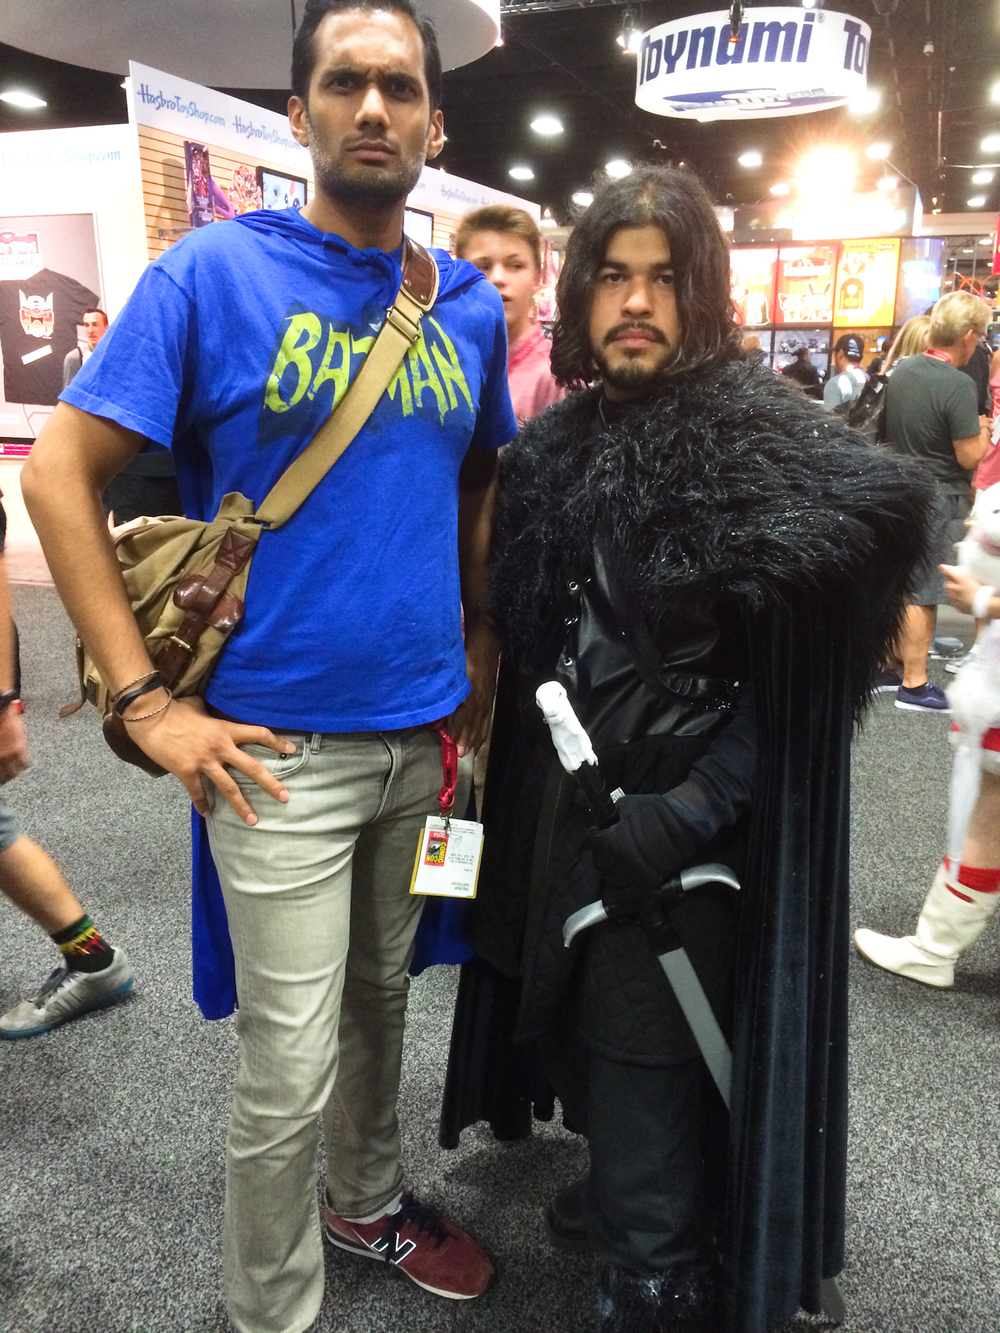 game-of-thrones-cosplay-san-diego-comic-con.jpg